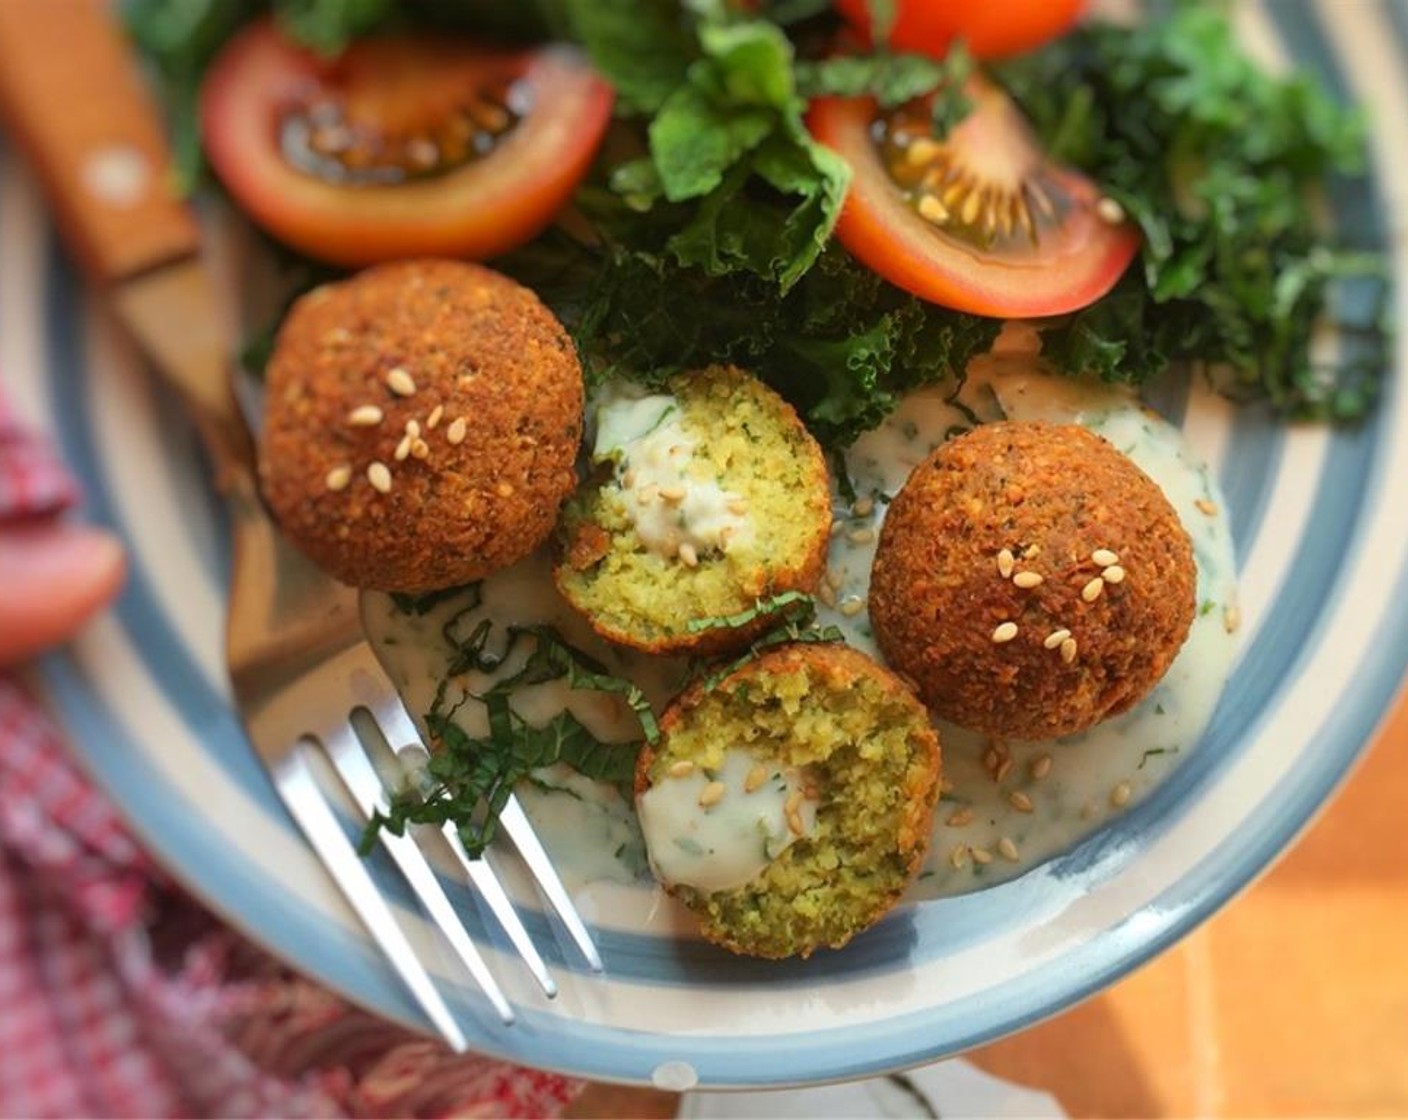 step 11 Serve the falafels with a dipping sauce of your choice (hummus, pesto, my sesame yogurt falafel sauce, even tartar sauce), some fresh lettuce, cucumber, tomato or tabbouleh or stuff it altogether in a warm pita bread.